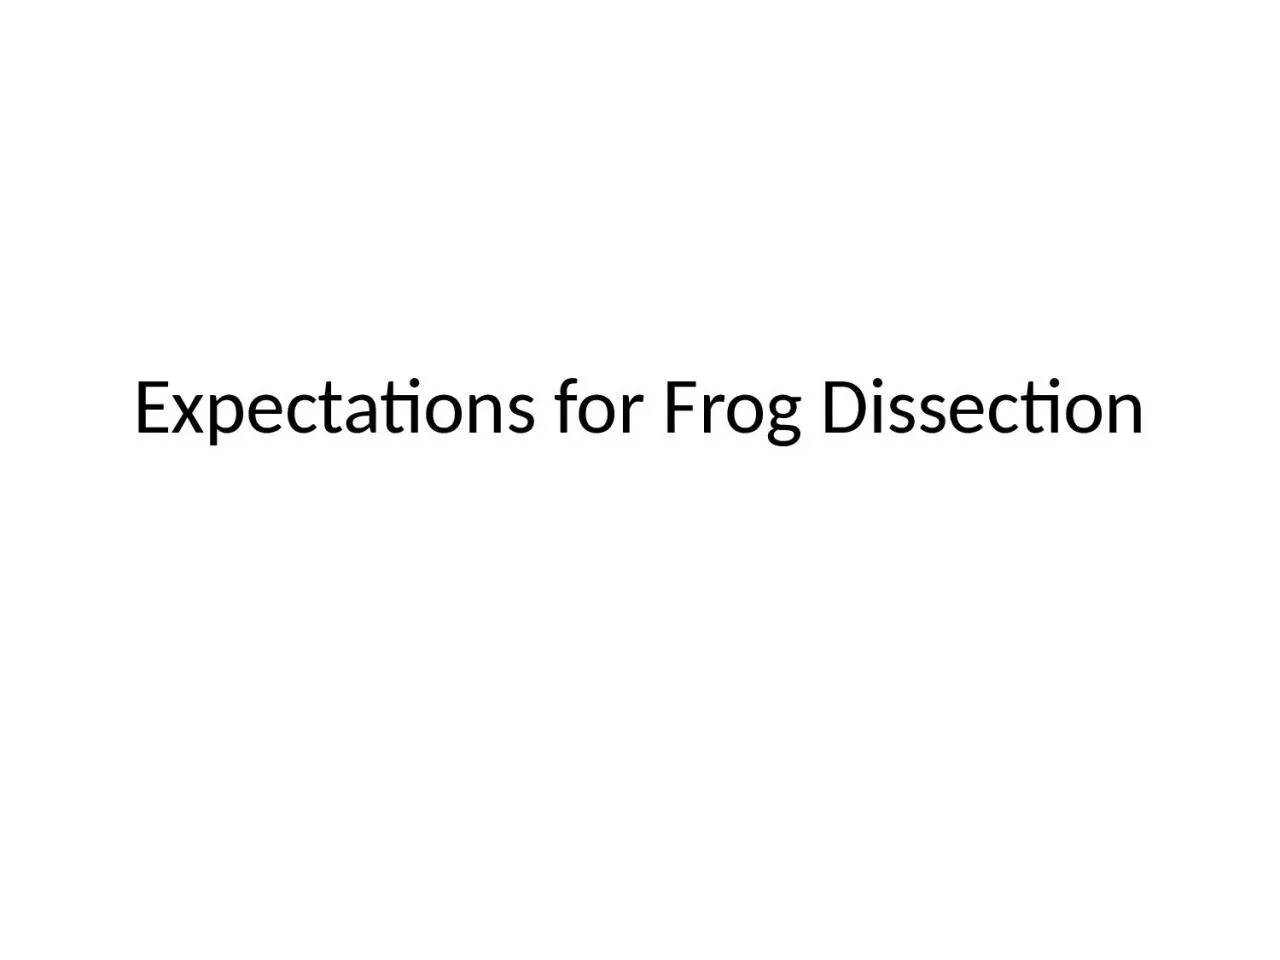 Expectations for Frog Dissection